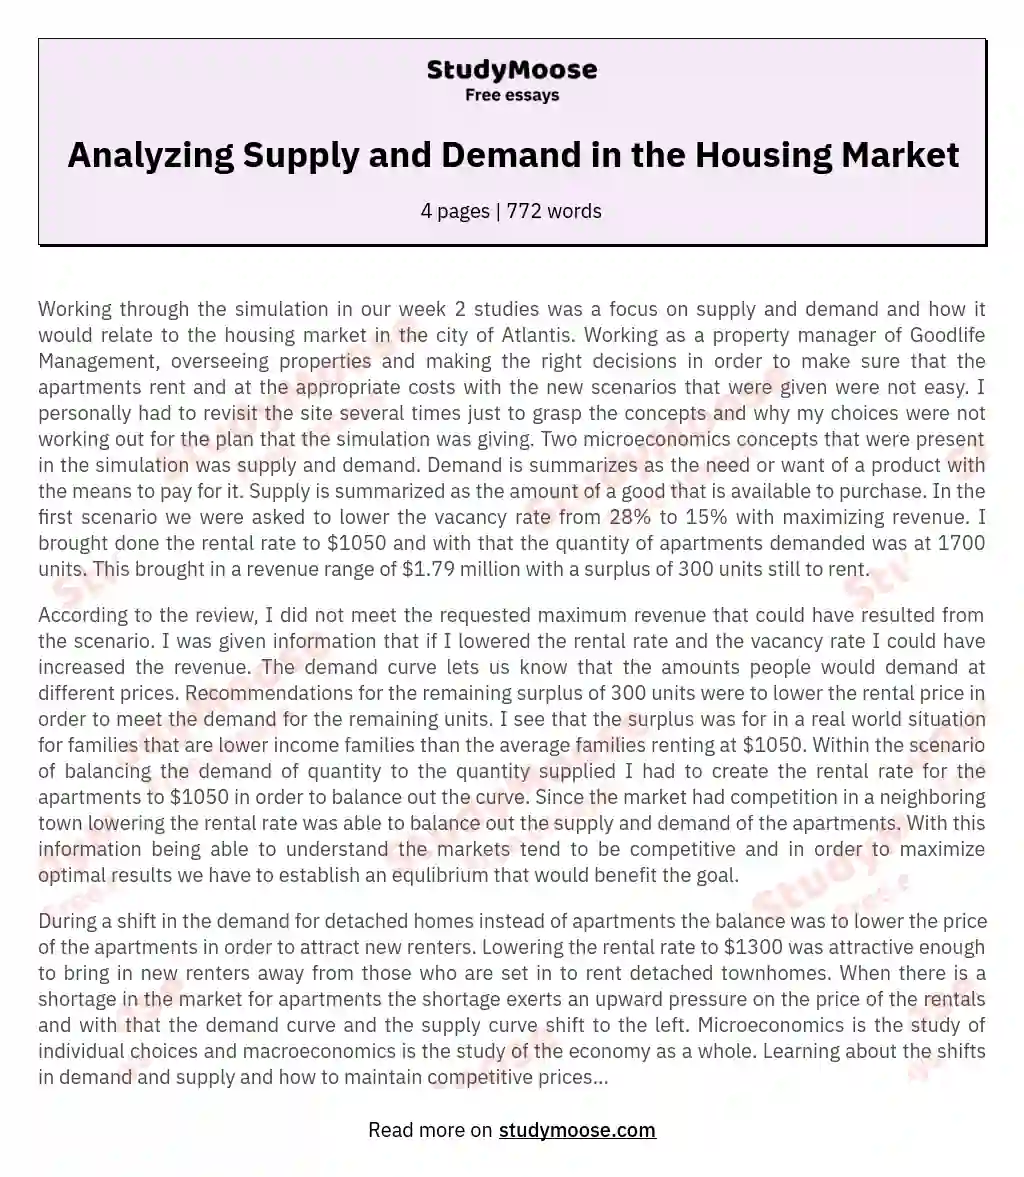 Analyzing Supply and Demand in the Housing Market essay